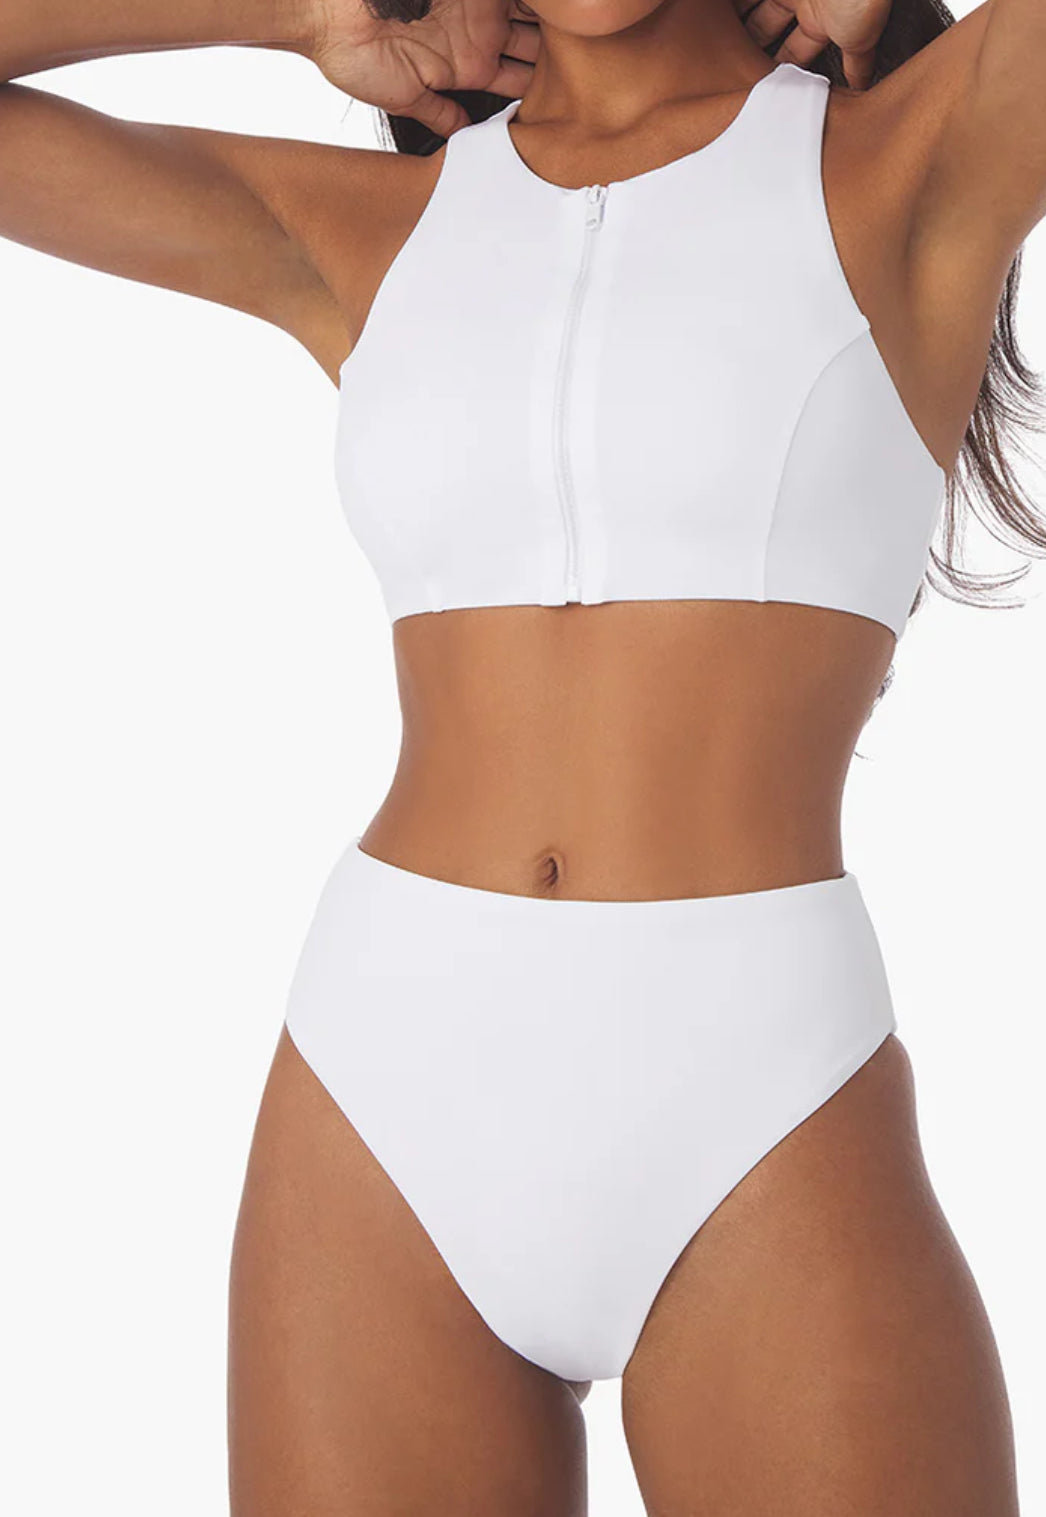 Forever 21 Zip-Front Racerback Bikini Top - ShopStyle Two Piece